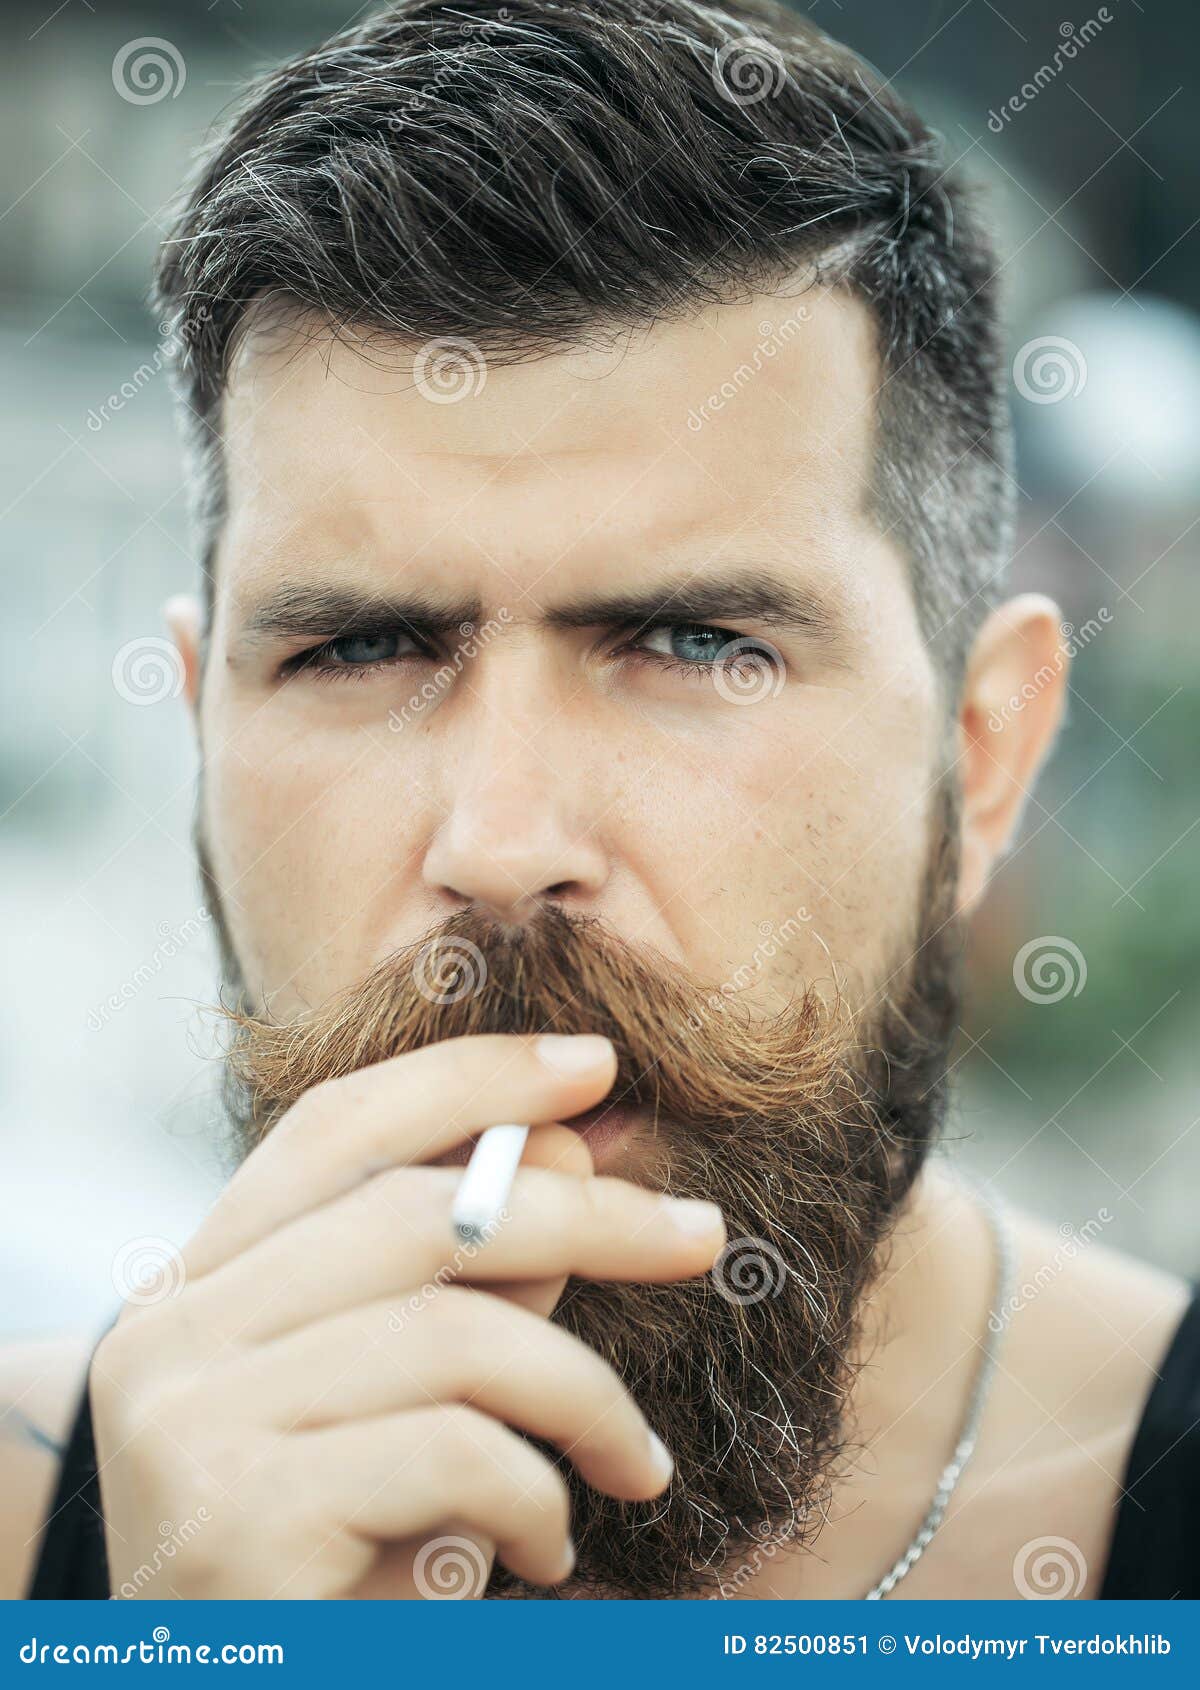 Frown Bearded Man Smoking Cigarette Stock Image - Image of handsome, young:  82500851